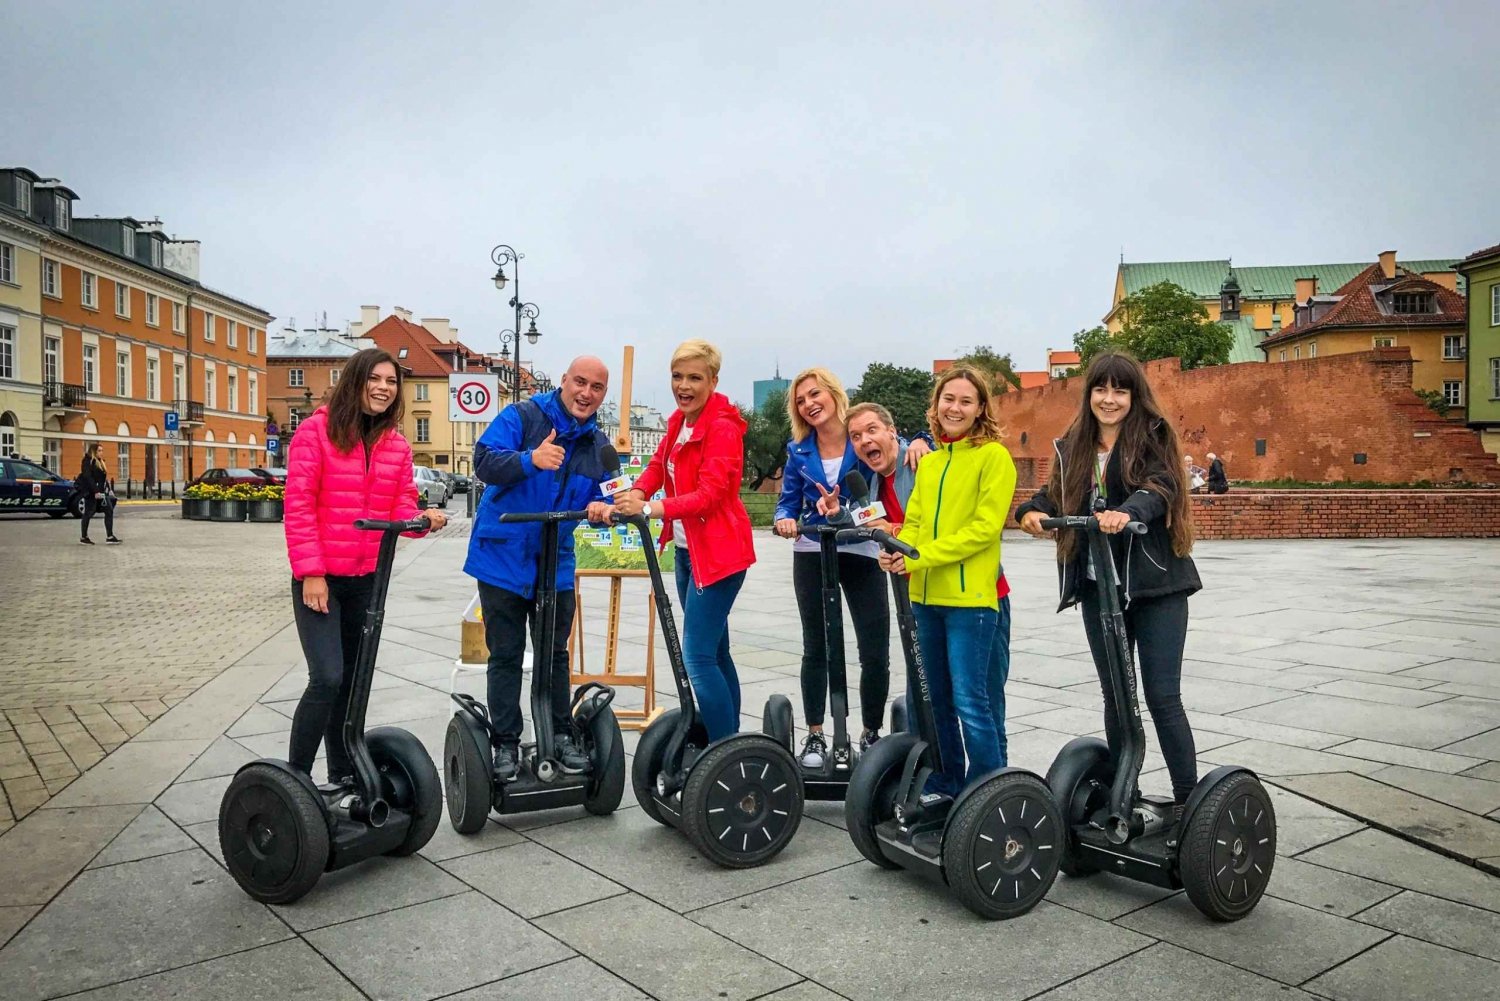 Gdansk: 90-Minute Guided Segway Tour of Gdansk Old Town